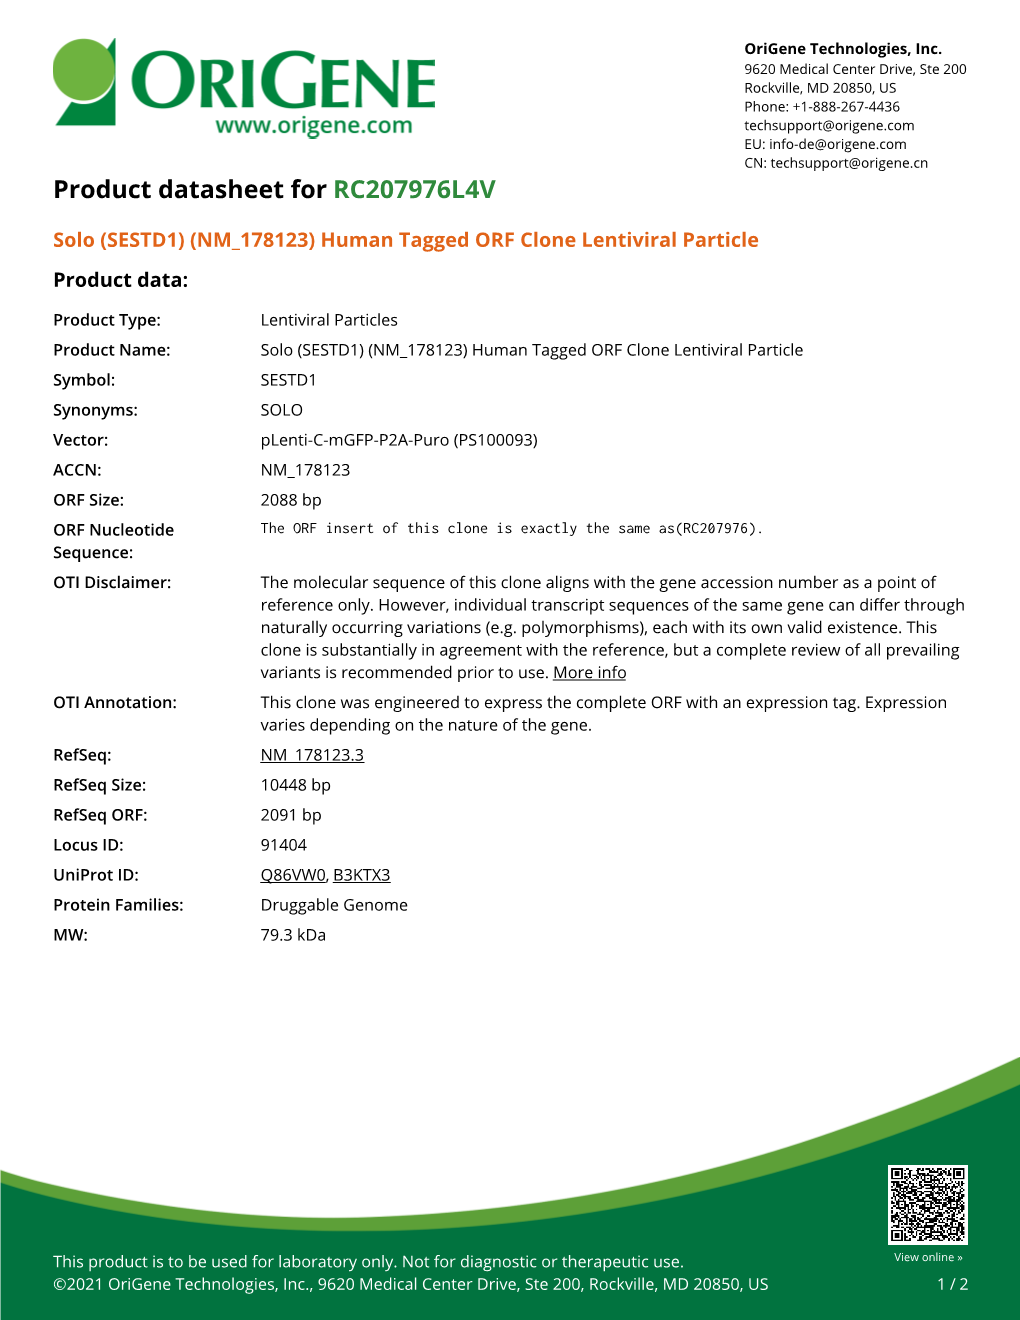 Solo (SESTD1) (NM 178123) Human Tagged ORF Clone Lentiviral Particle Product Data